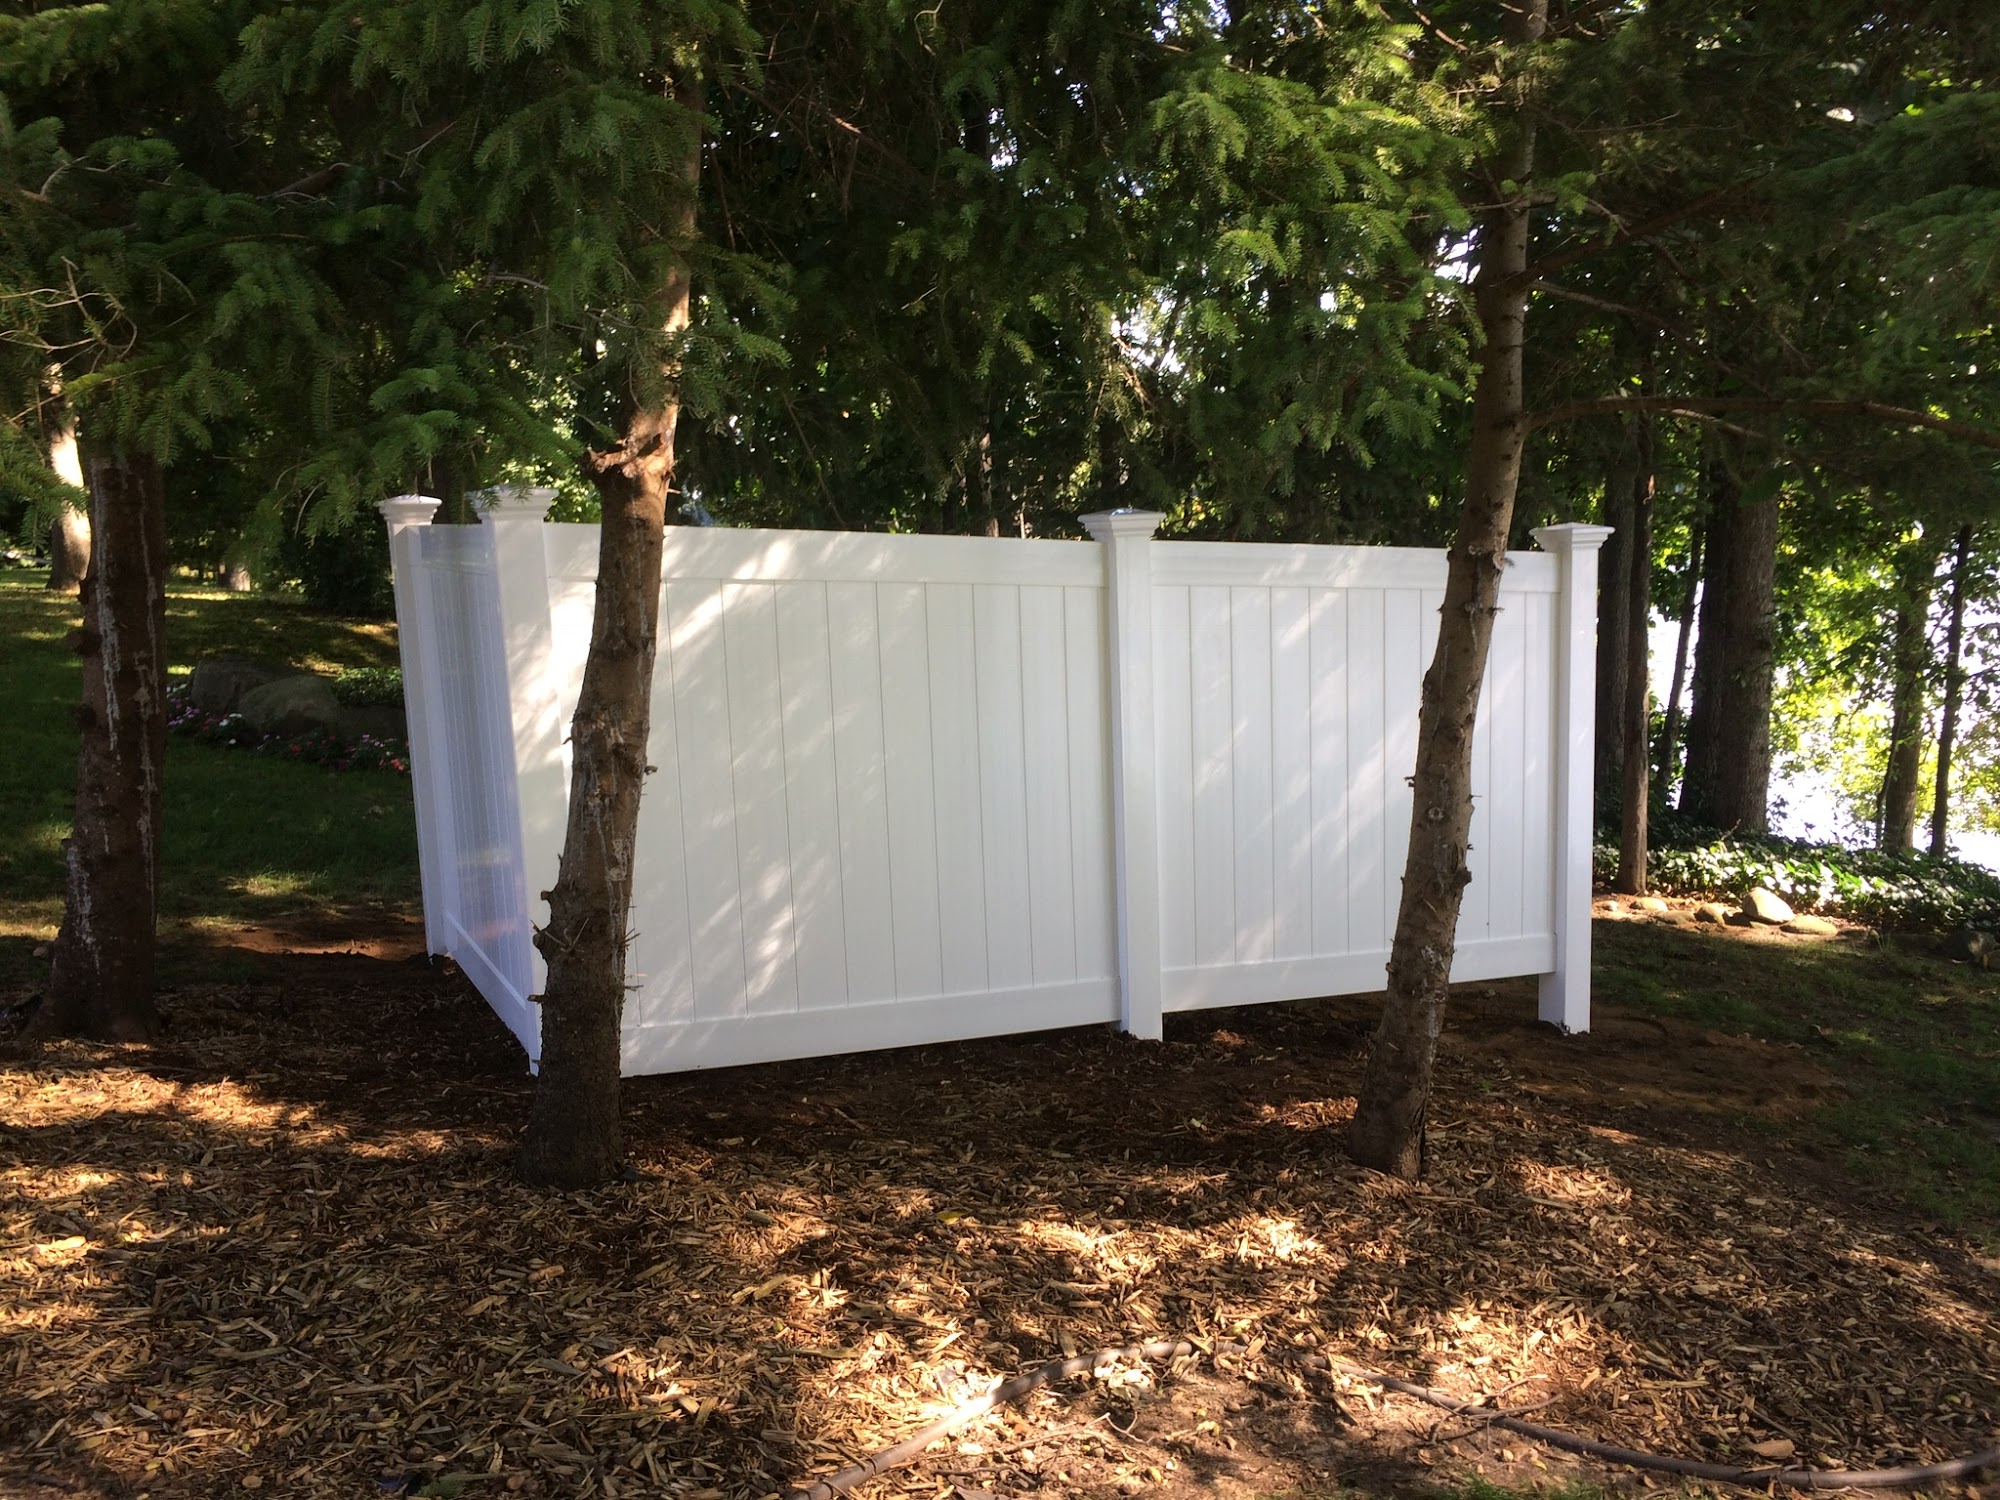 D & D Fencing 20965 Featherstone Rd, Centreville Michigan 49032